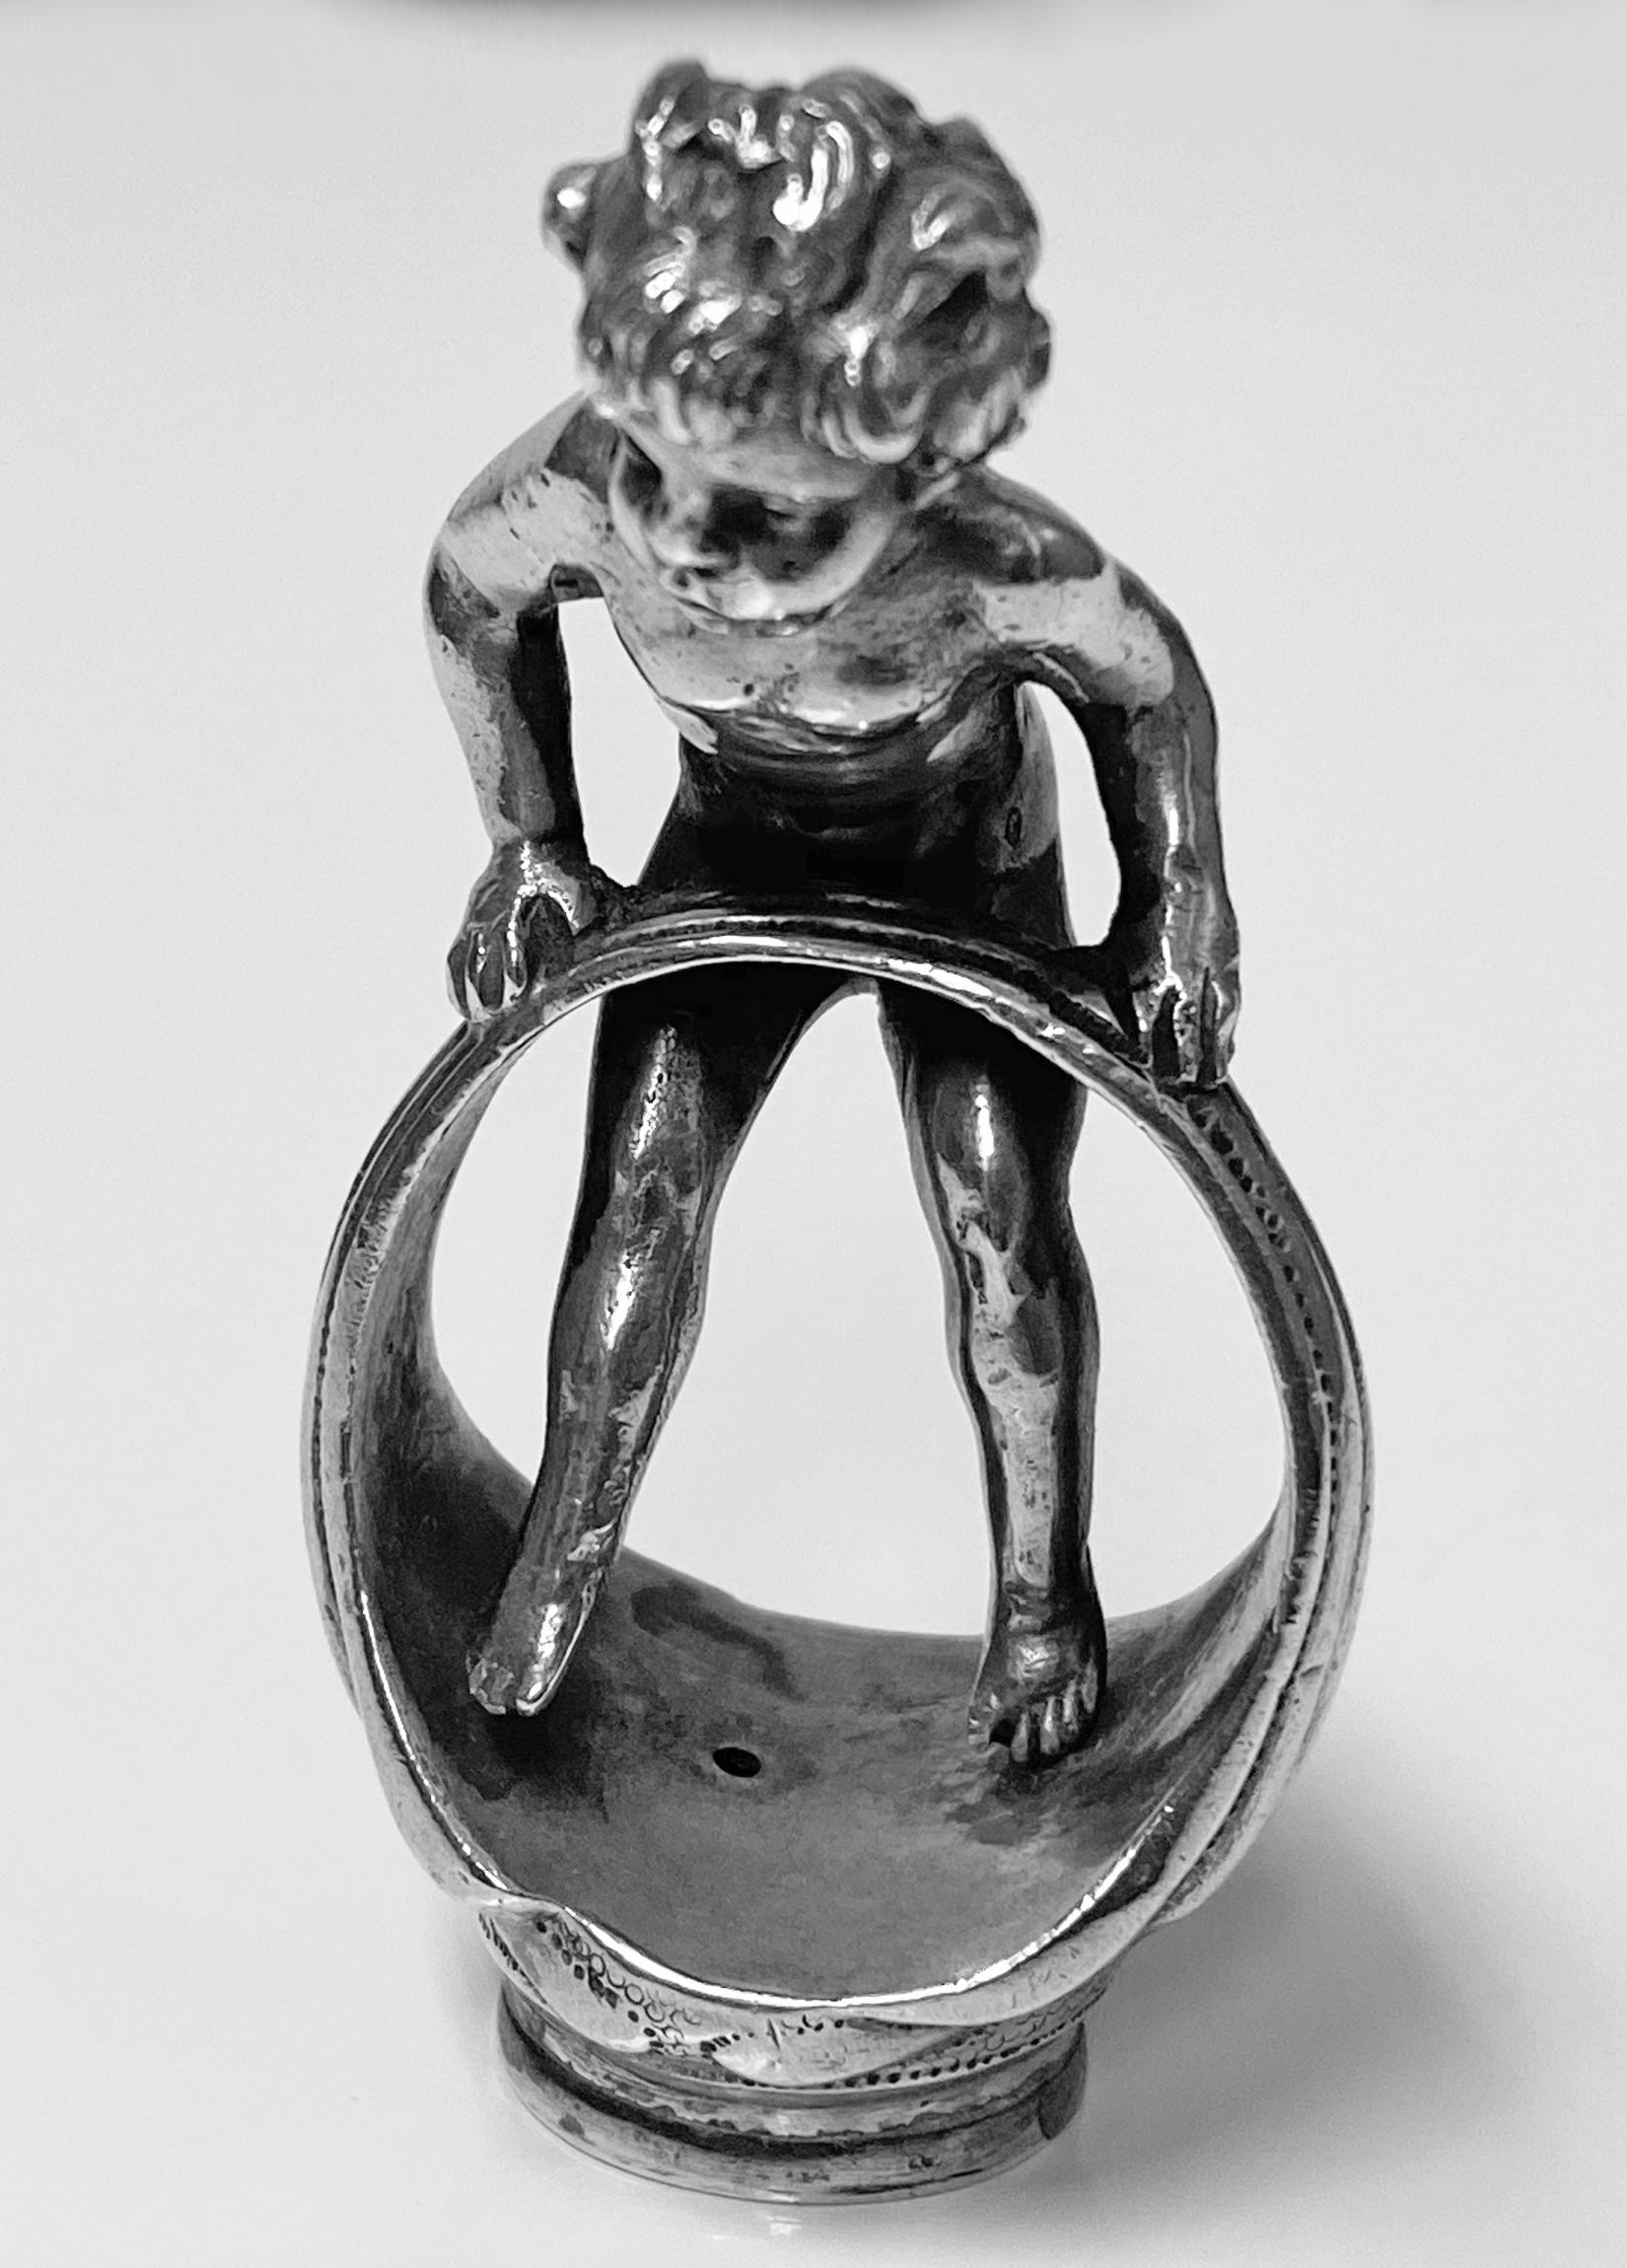 Large sterling silver desk seal with cherub or angelic figure in a finger ring engraved with crest of a cat at the base. Unusual nude figure balancing on the ring. The back of leg with import marks for Chester, 1912. Condition: Very good. Measures: